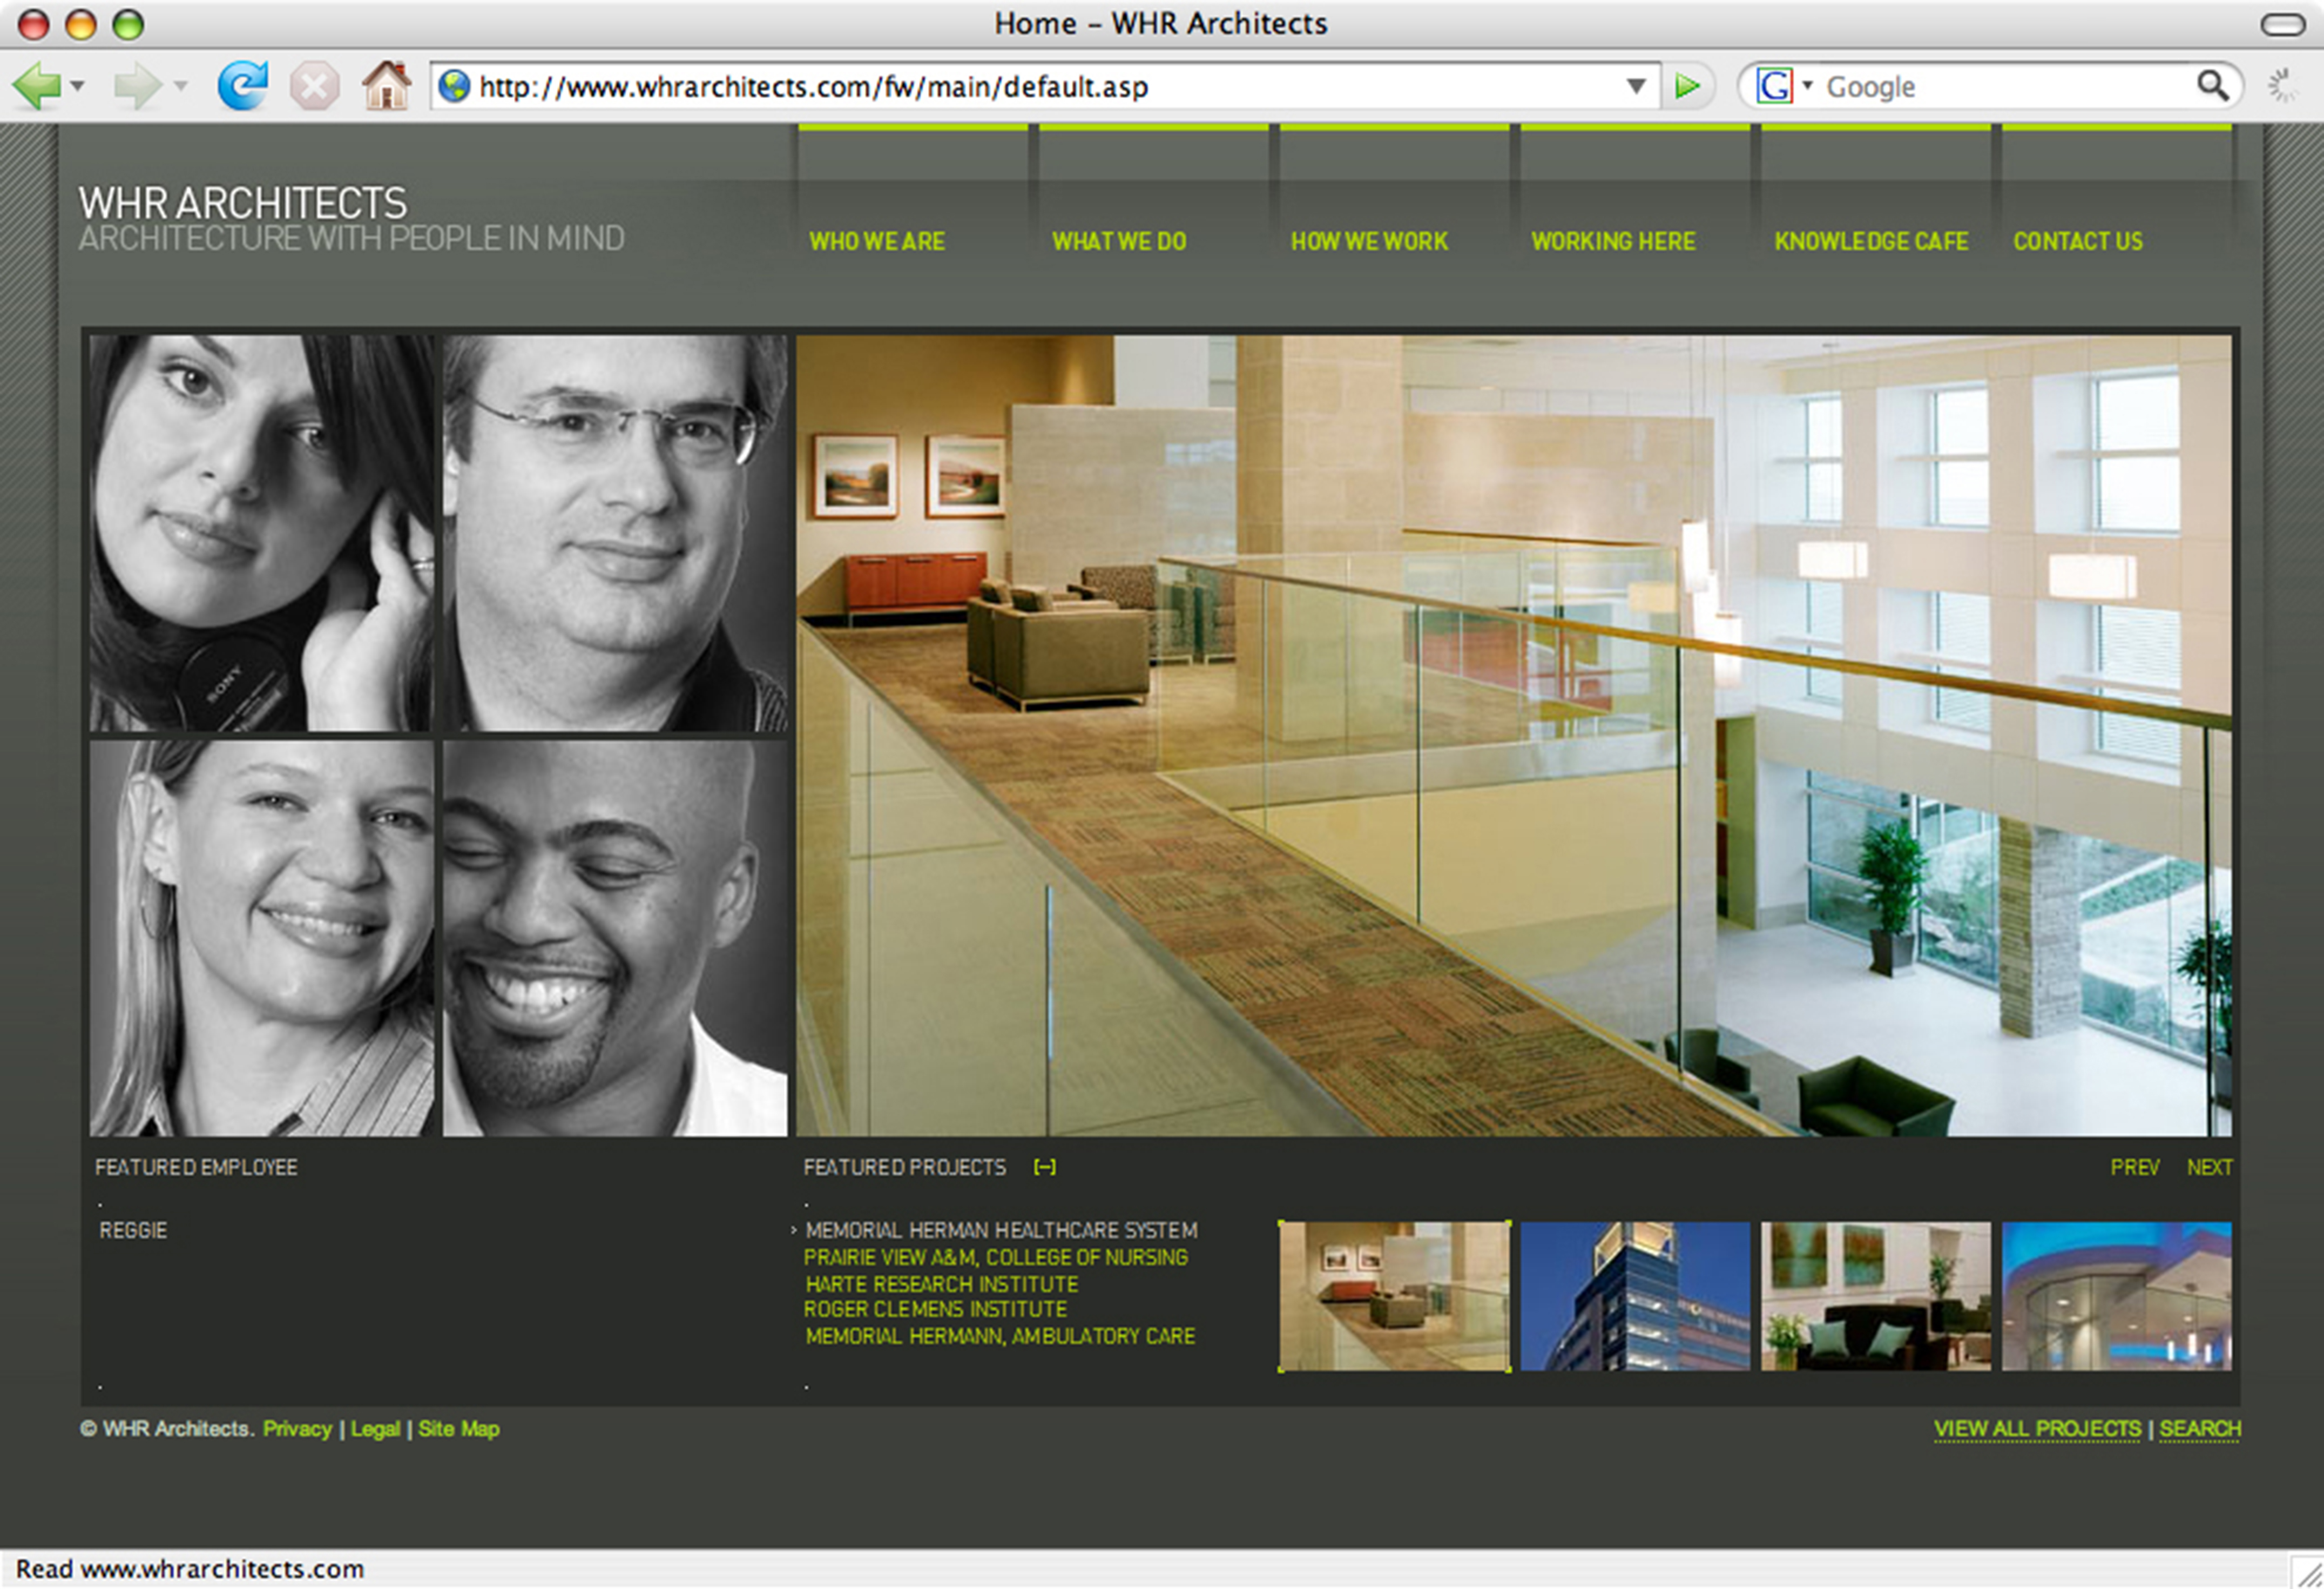 WHR Architects Web Site image